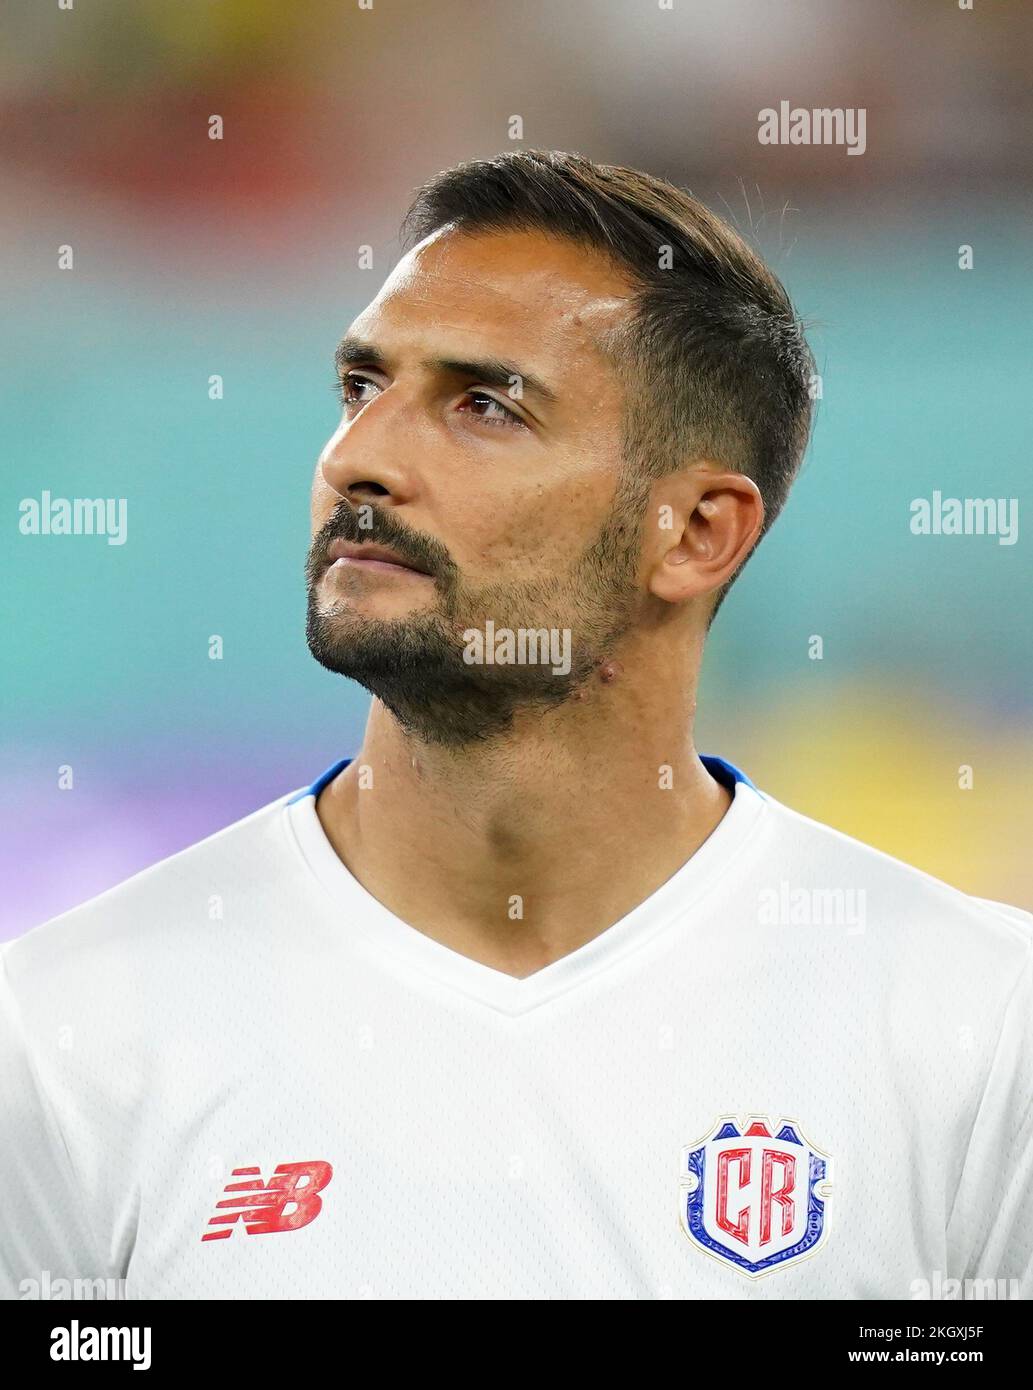 Costa Rica's Celso Borges during the FIFA World Cup Group E match at the Al Thumama Stadium, Doha. Picture date: Wednesday November 23, 2022. Stock Photo